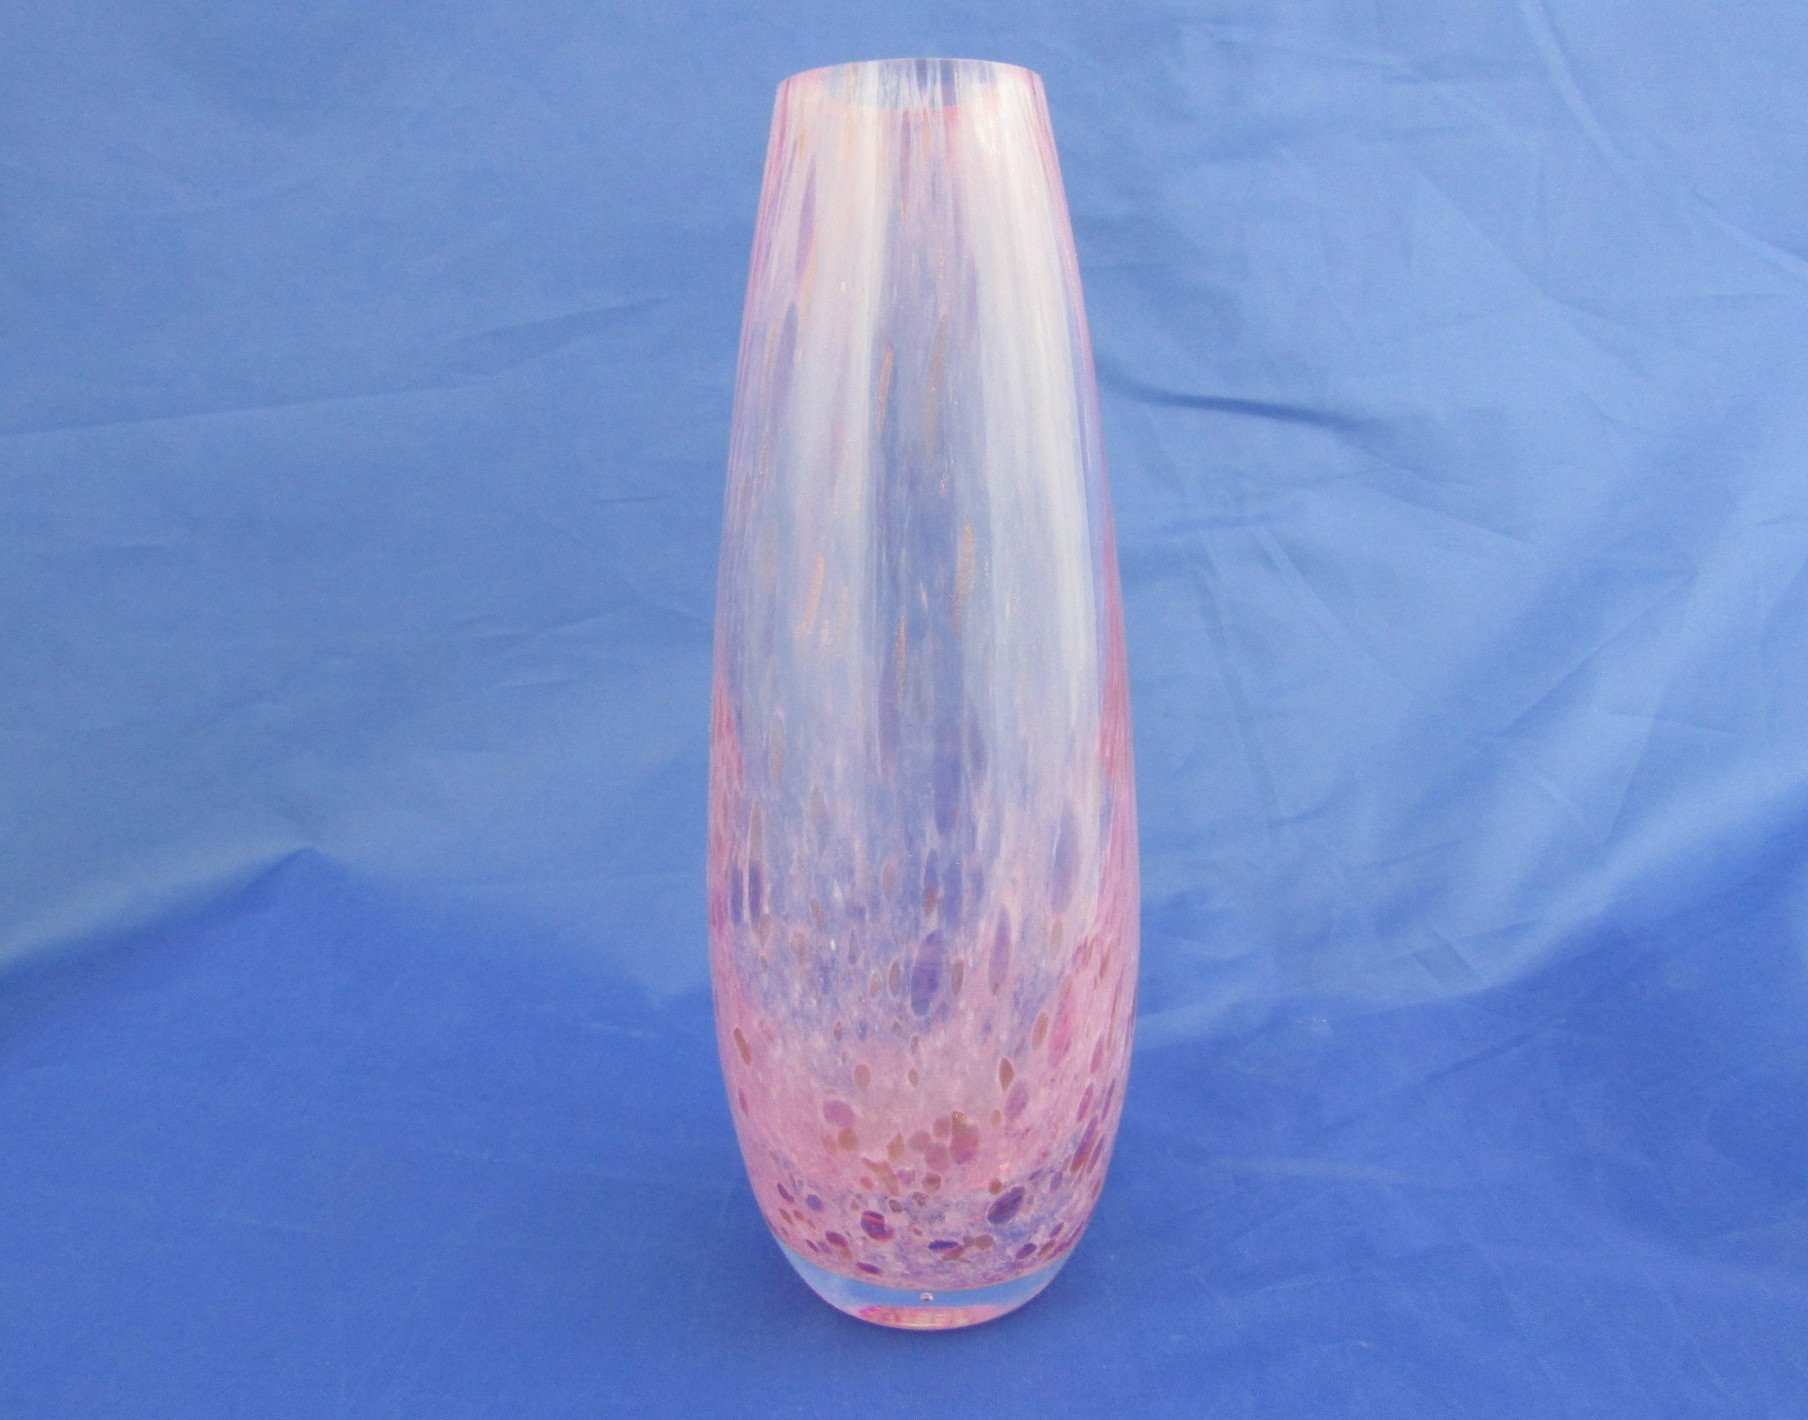 19 Best Cheap Glass Round Vases 2022 free download cheap glass round vases of caithness glass vase teardrop shaped vase pink spatter glass etsy within dc29fc294c28ezoom